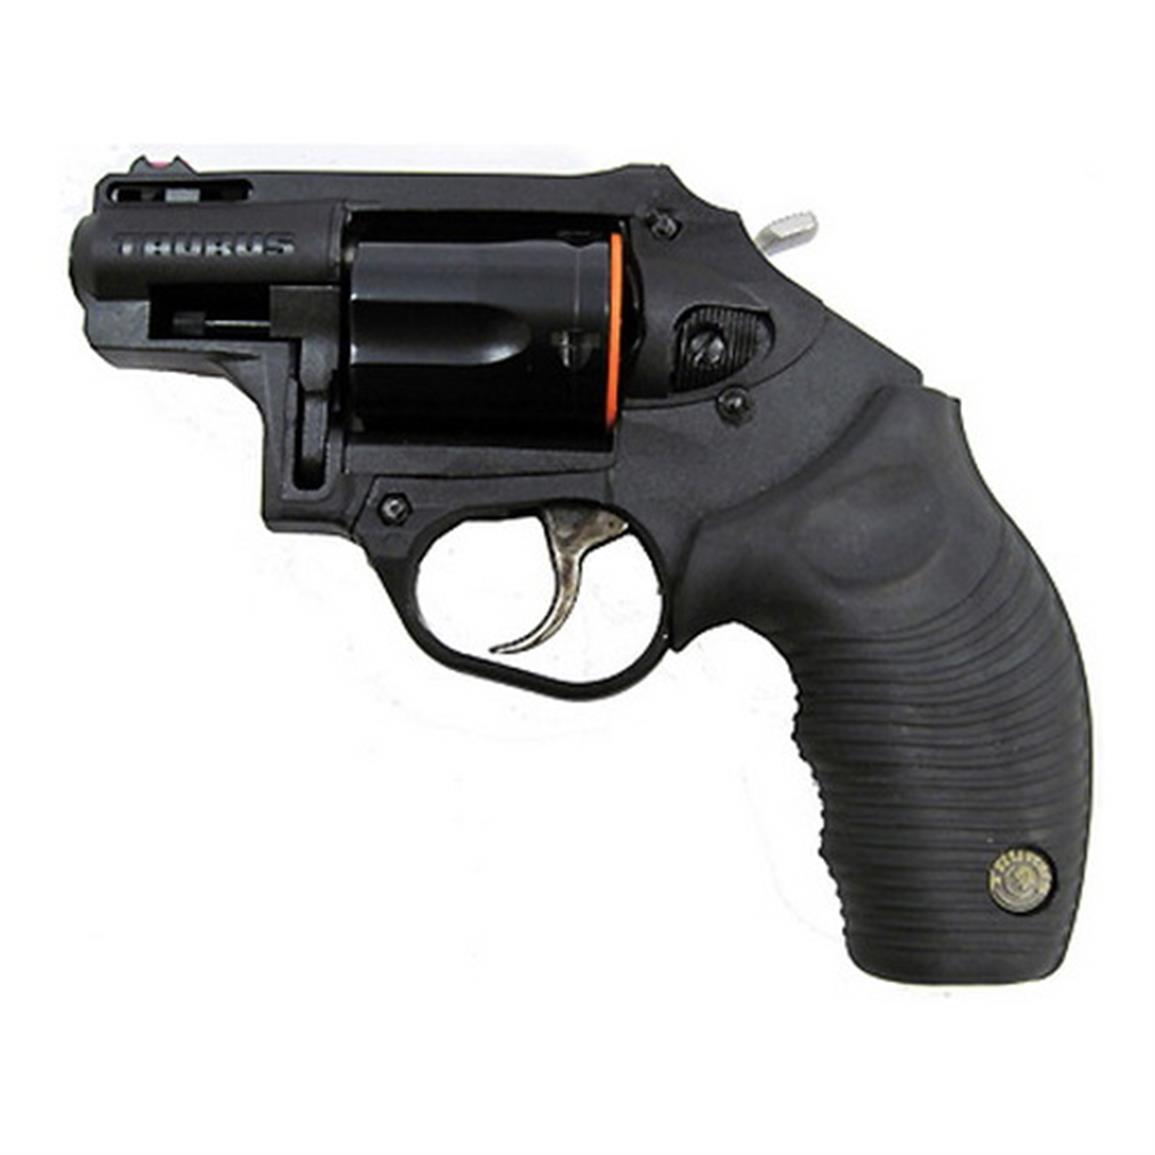 Top 98+ Images pictures of 38 snub nose revolvers Full HD, 2k, 4k